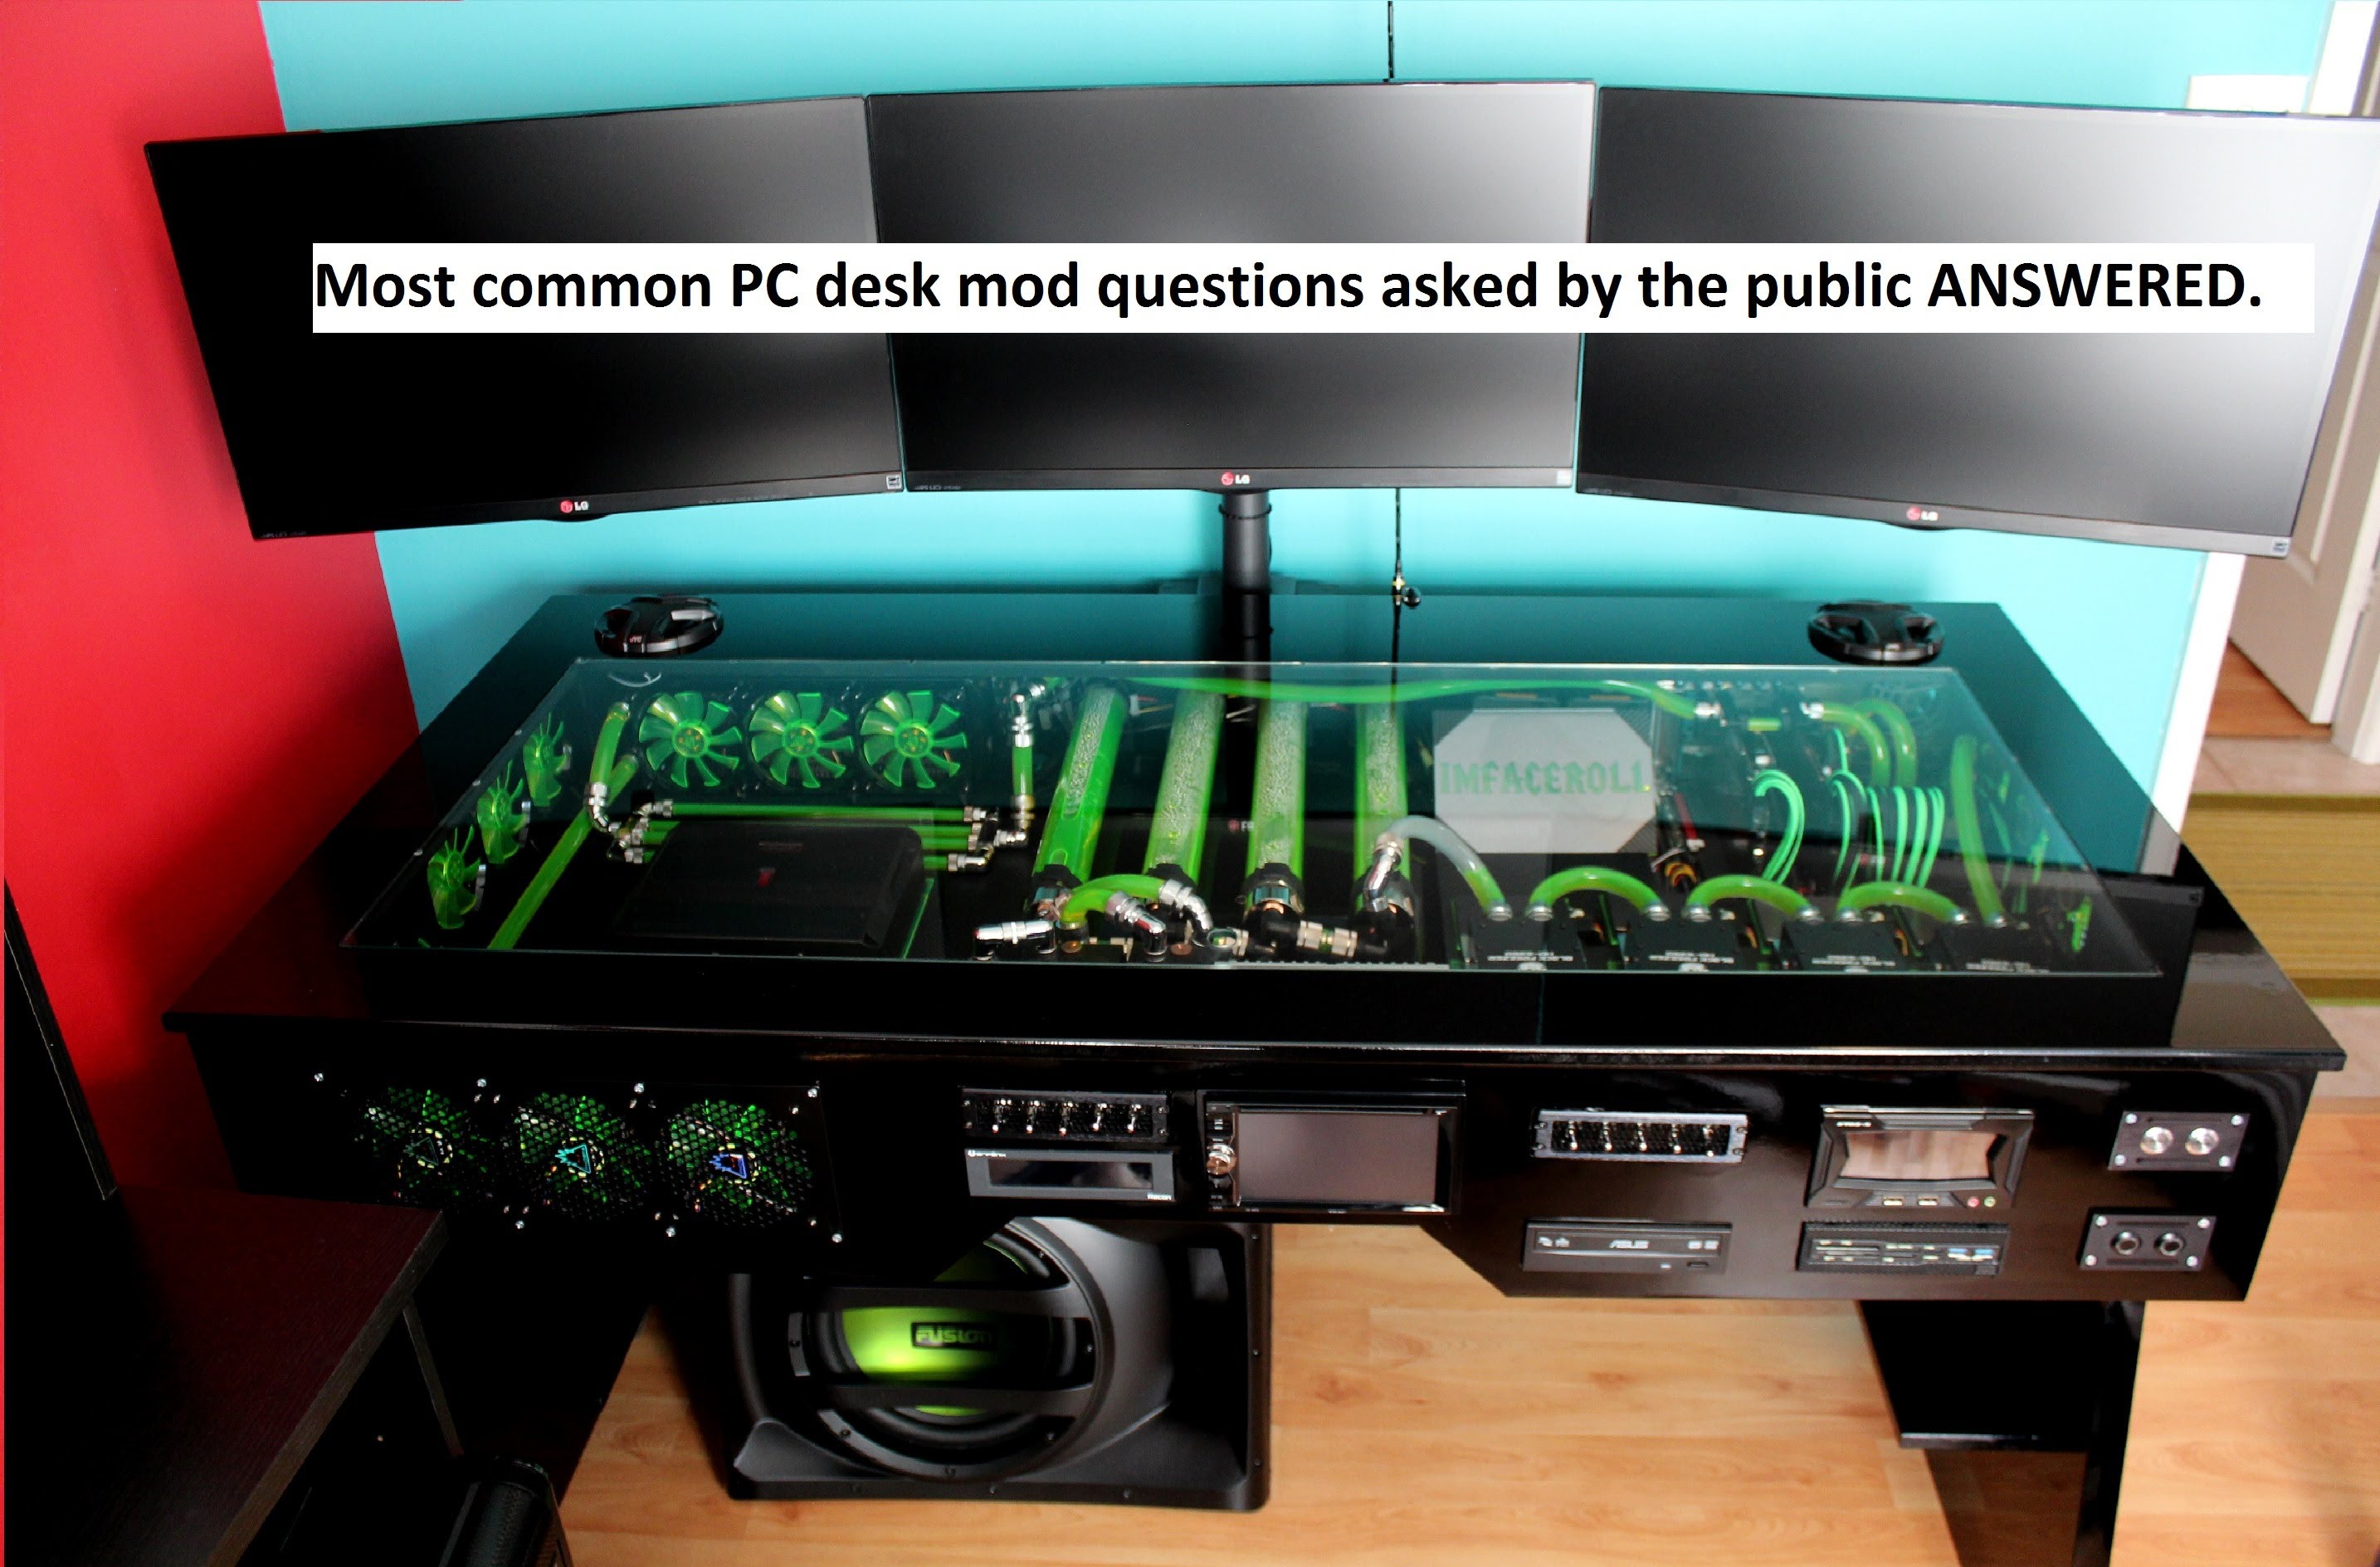 custom water cooled pc desk mod commonly asked questions answered. - youtube QCLBCUO